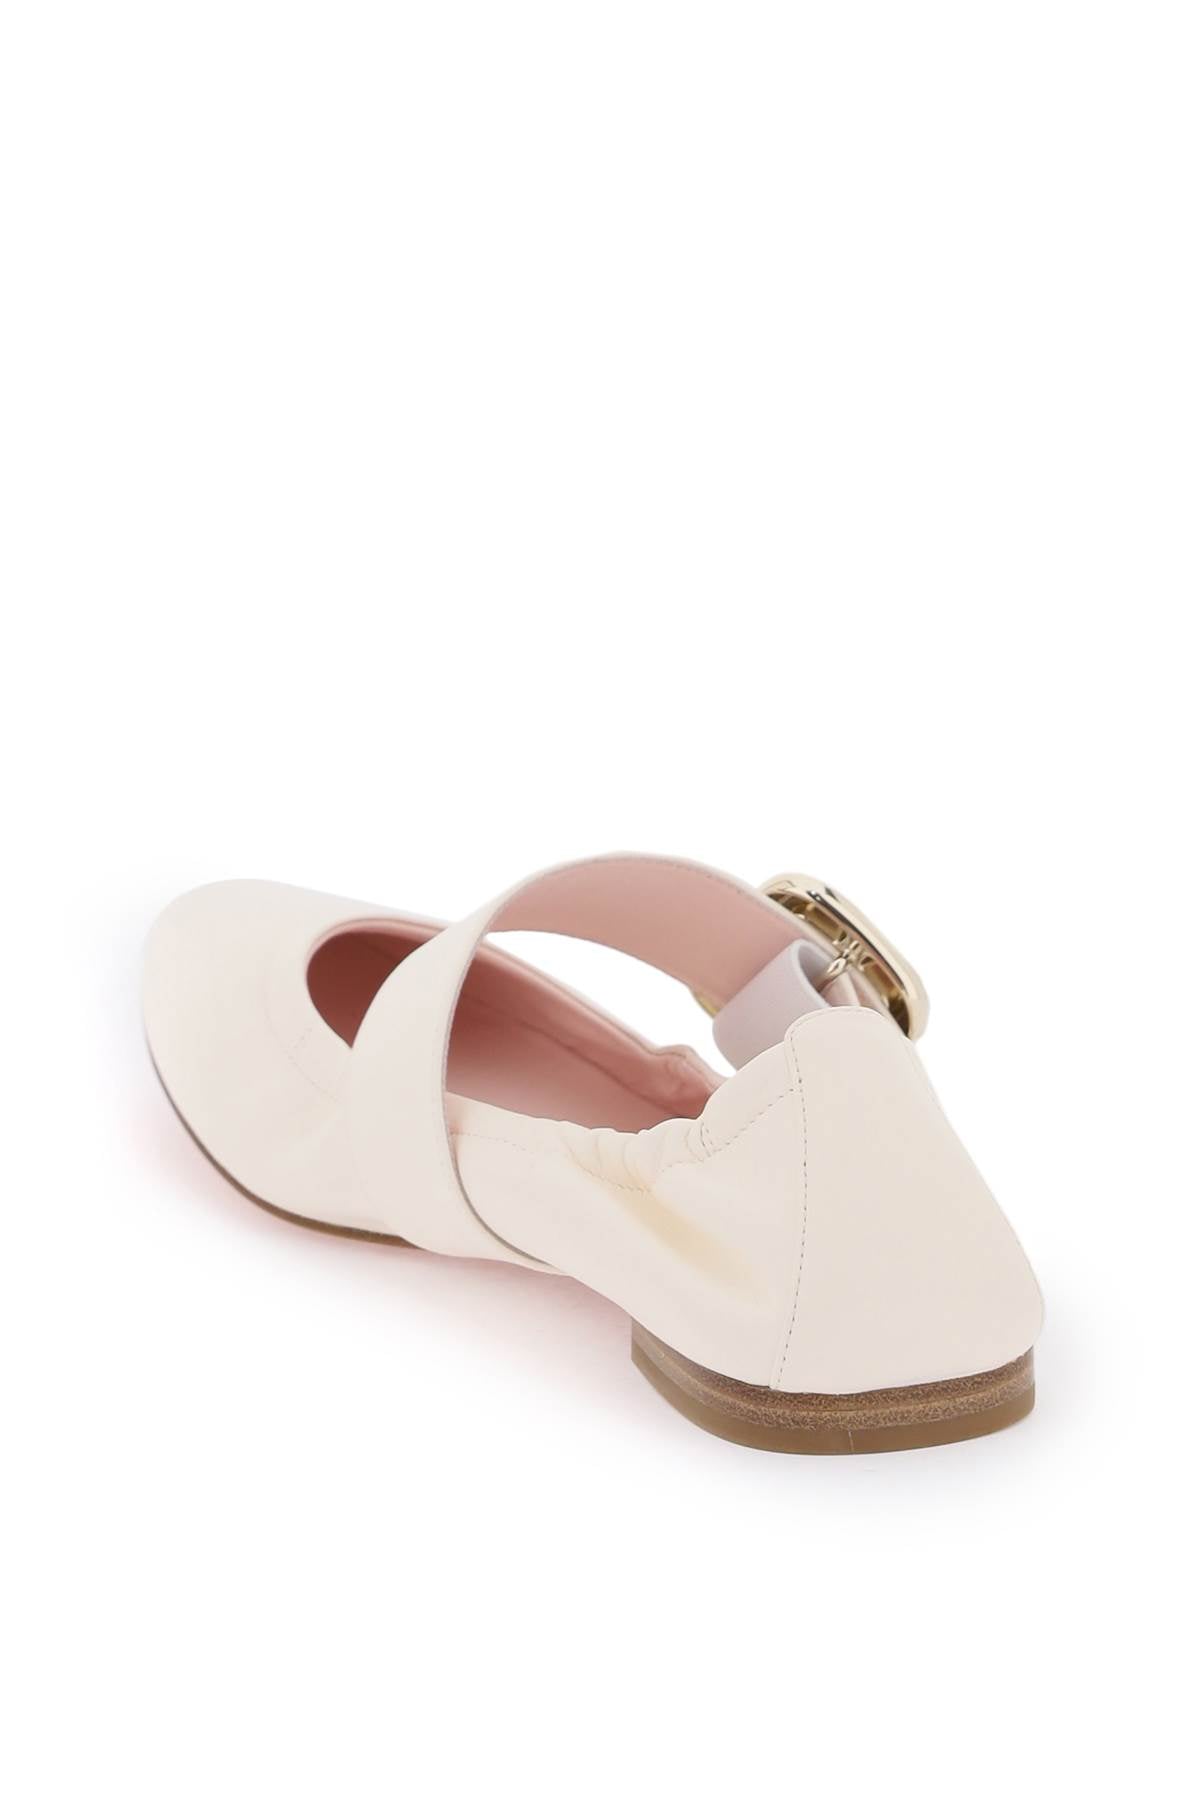 ROGER VIVIER Classic White Leather Ballerina Flats for Women – Perfect for FW23!